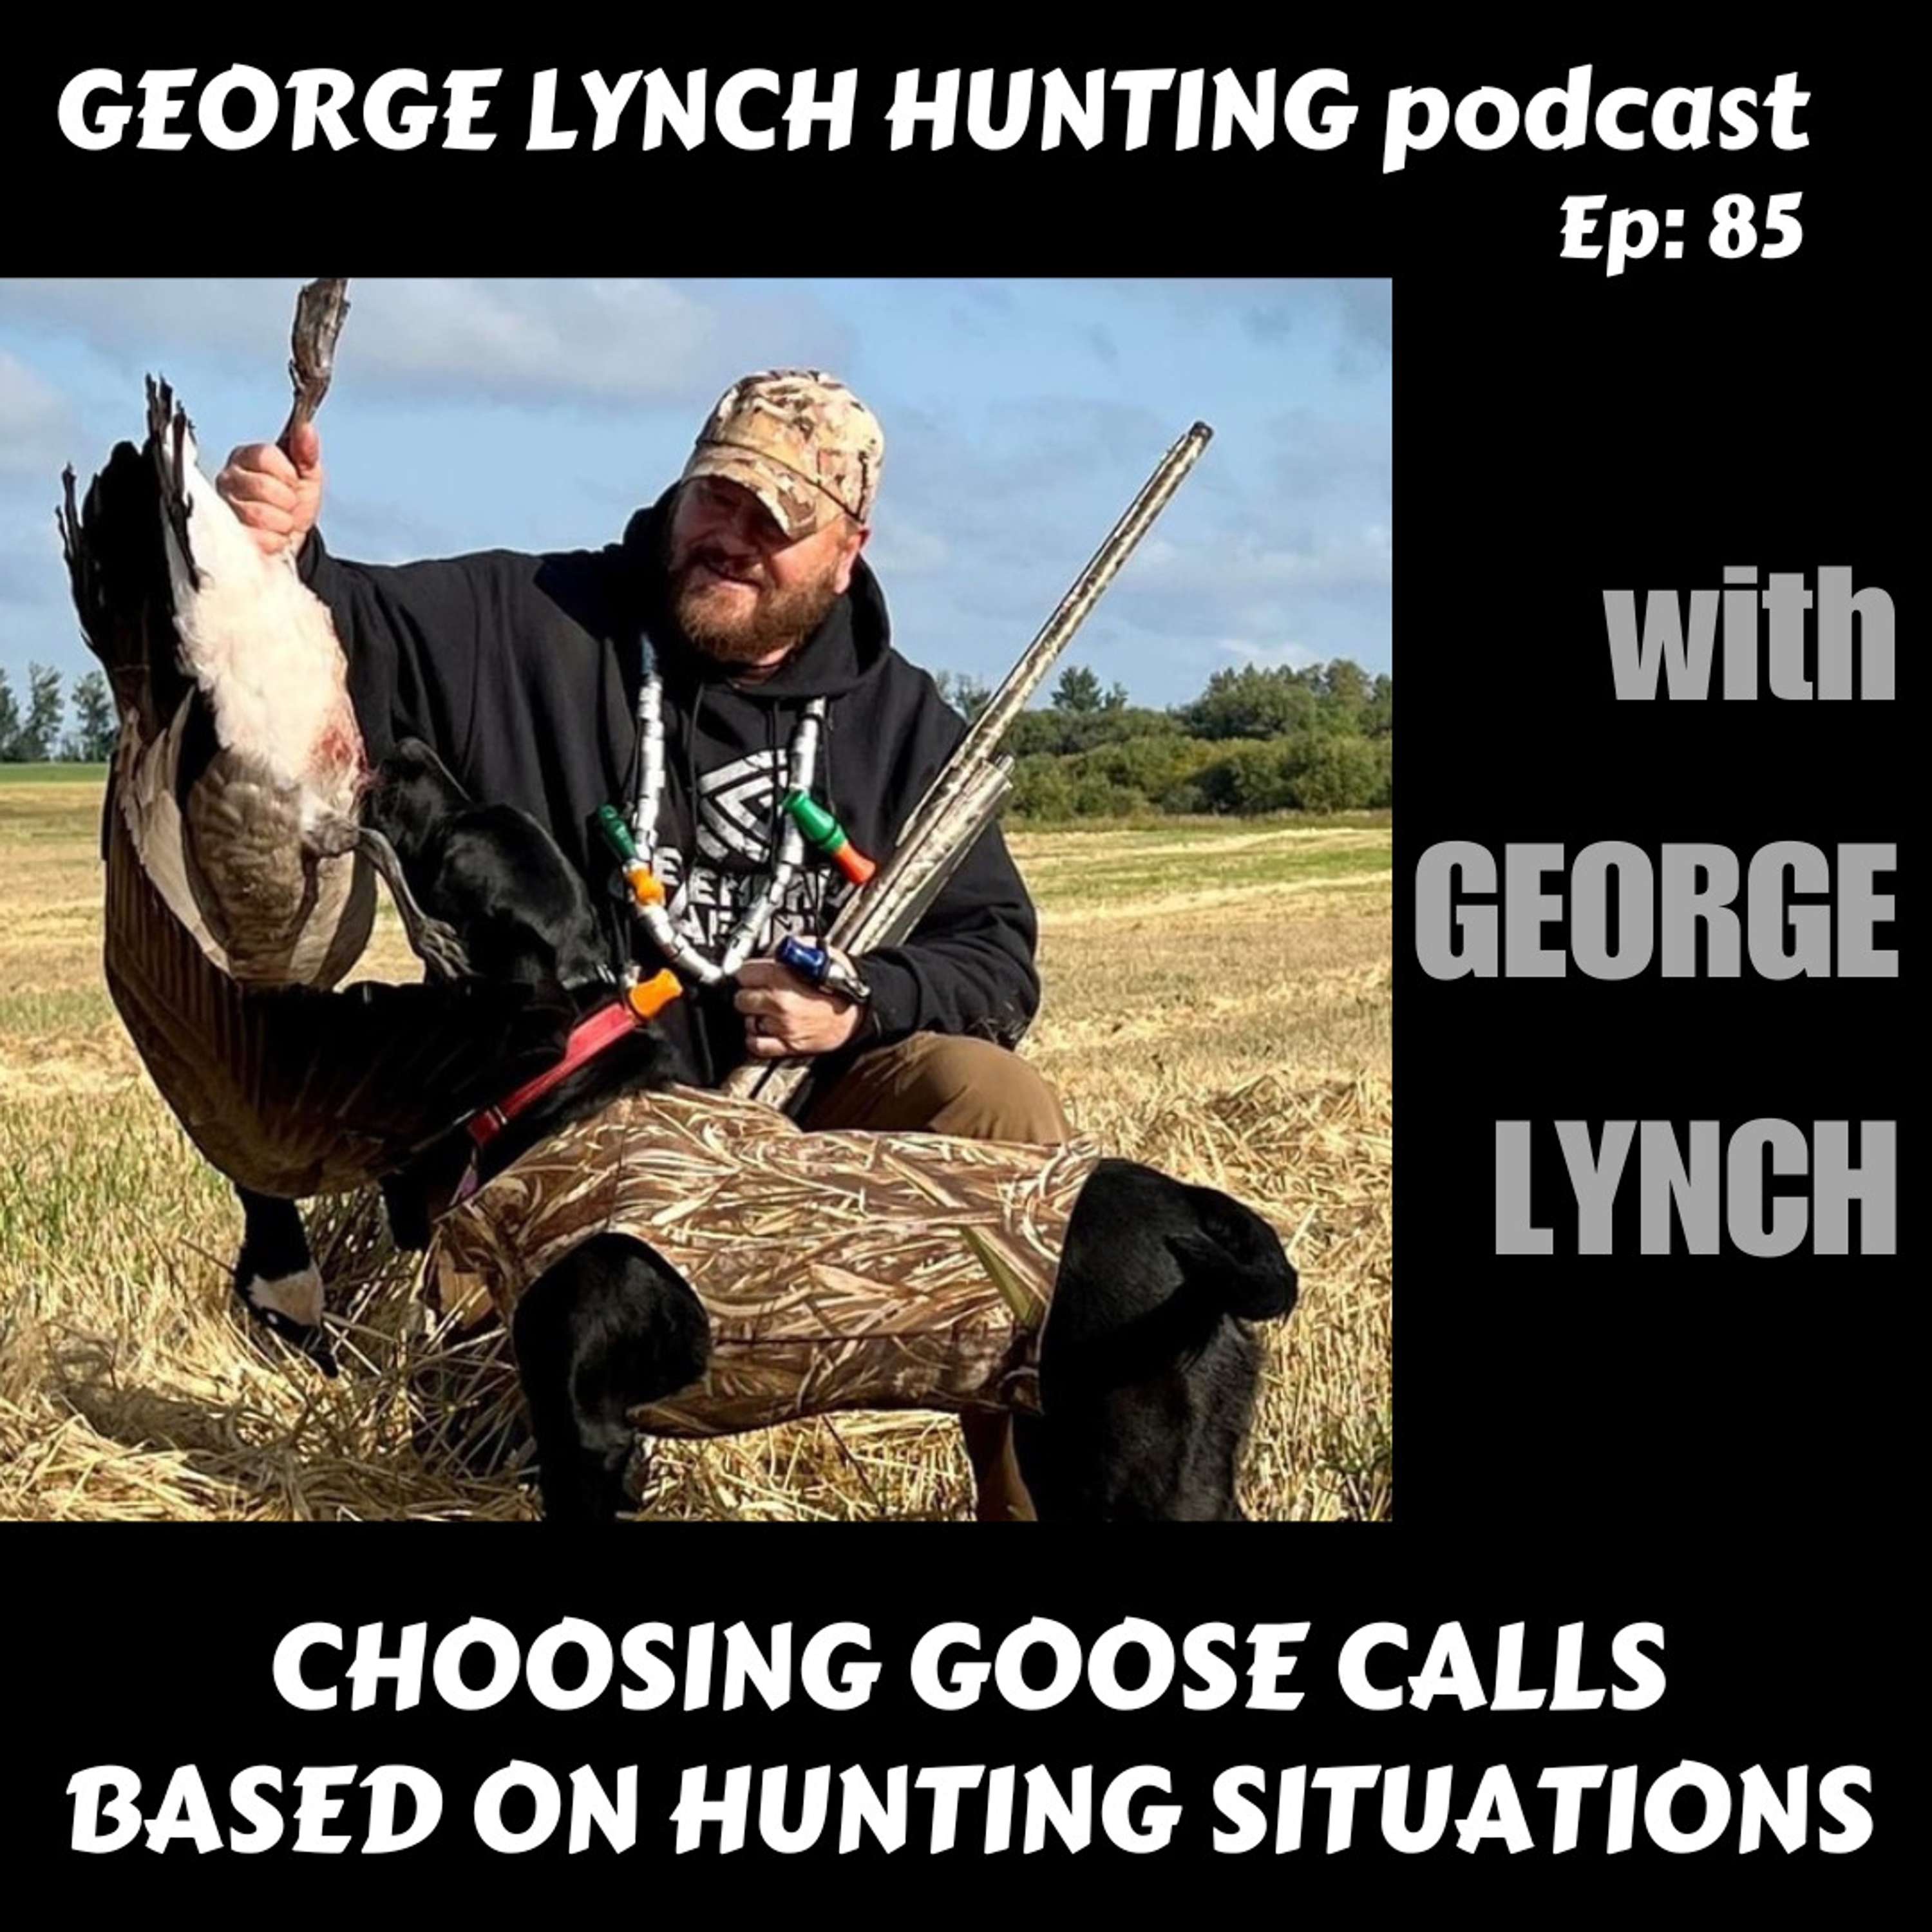 CHOOSING GOOSE CALLS BASED ON HUNTING SITUATIONS with GEORGE LYNCH of Legendary Gear